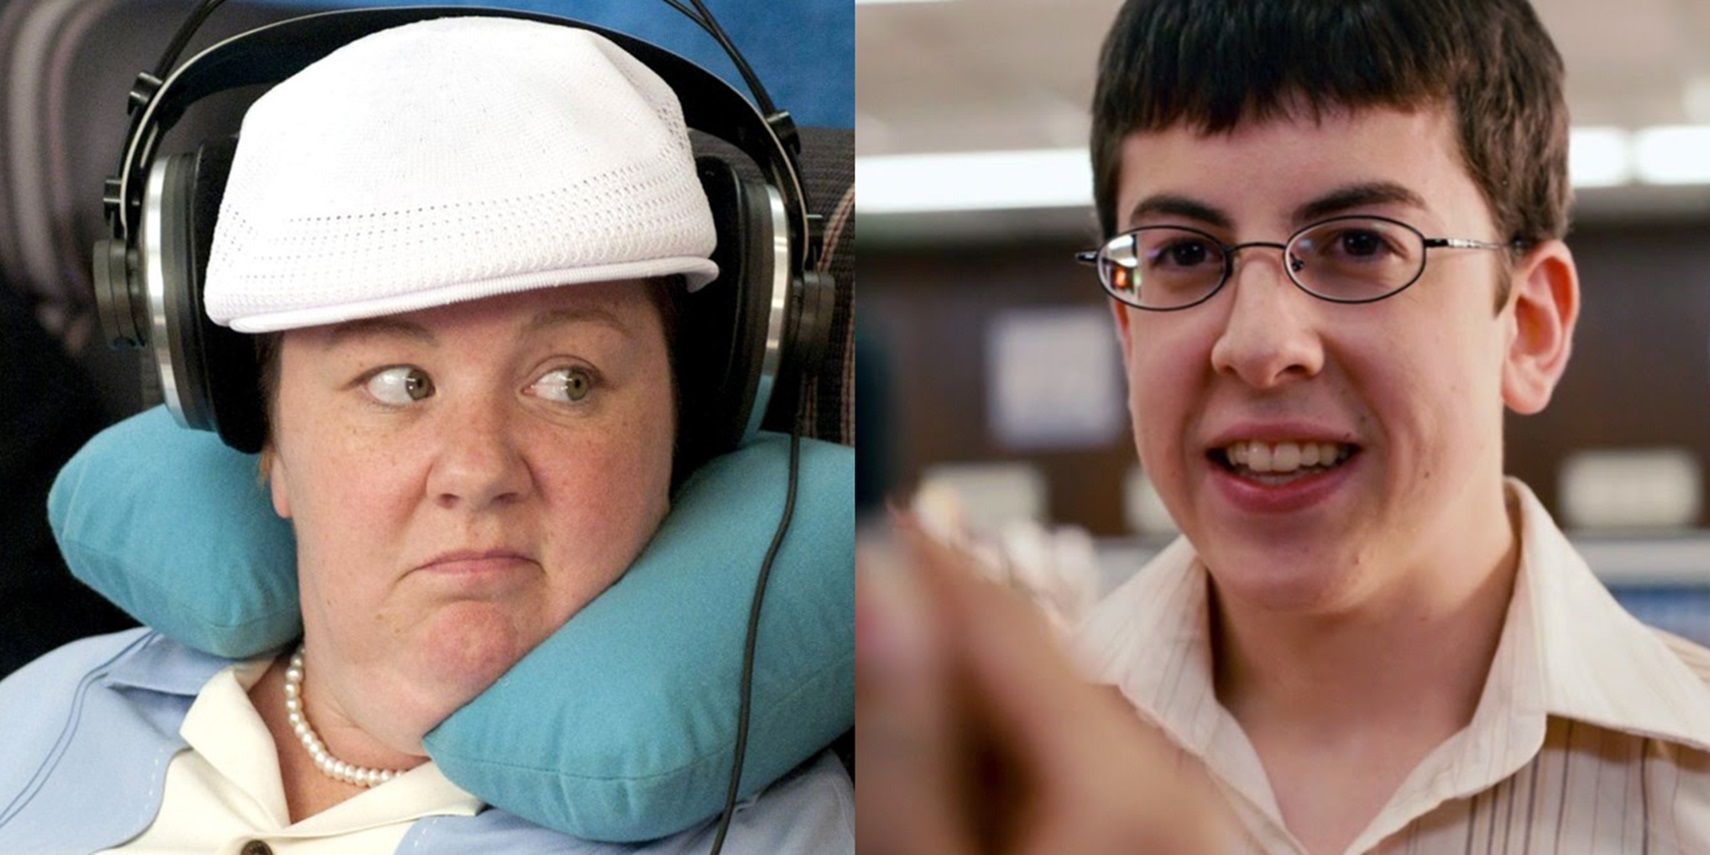 Split image of Melissa McCarthy as Megan in Bridesmaids and Christopher Mintz-Plasse as Fogell in Superbad